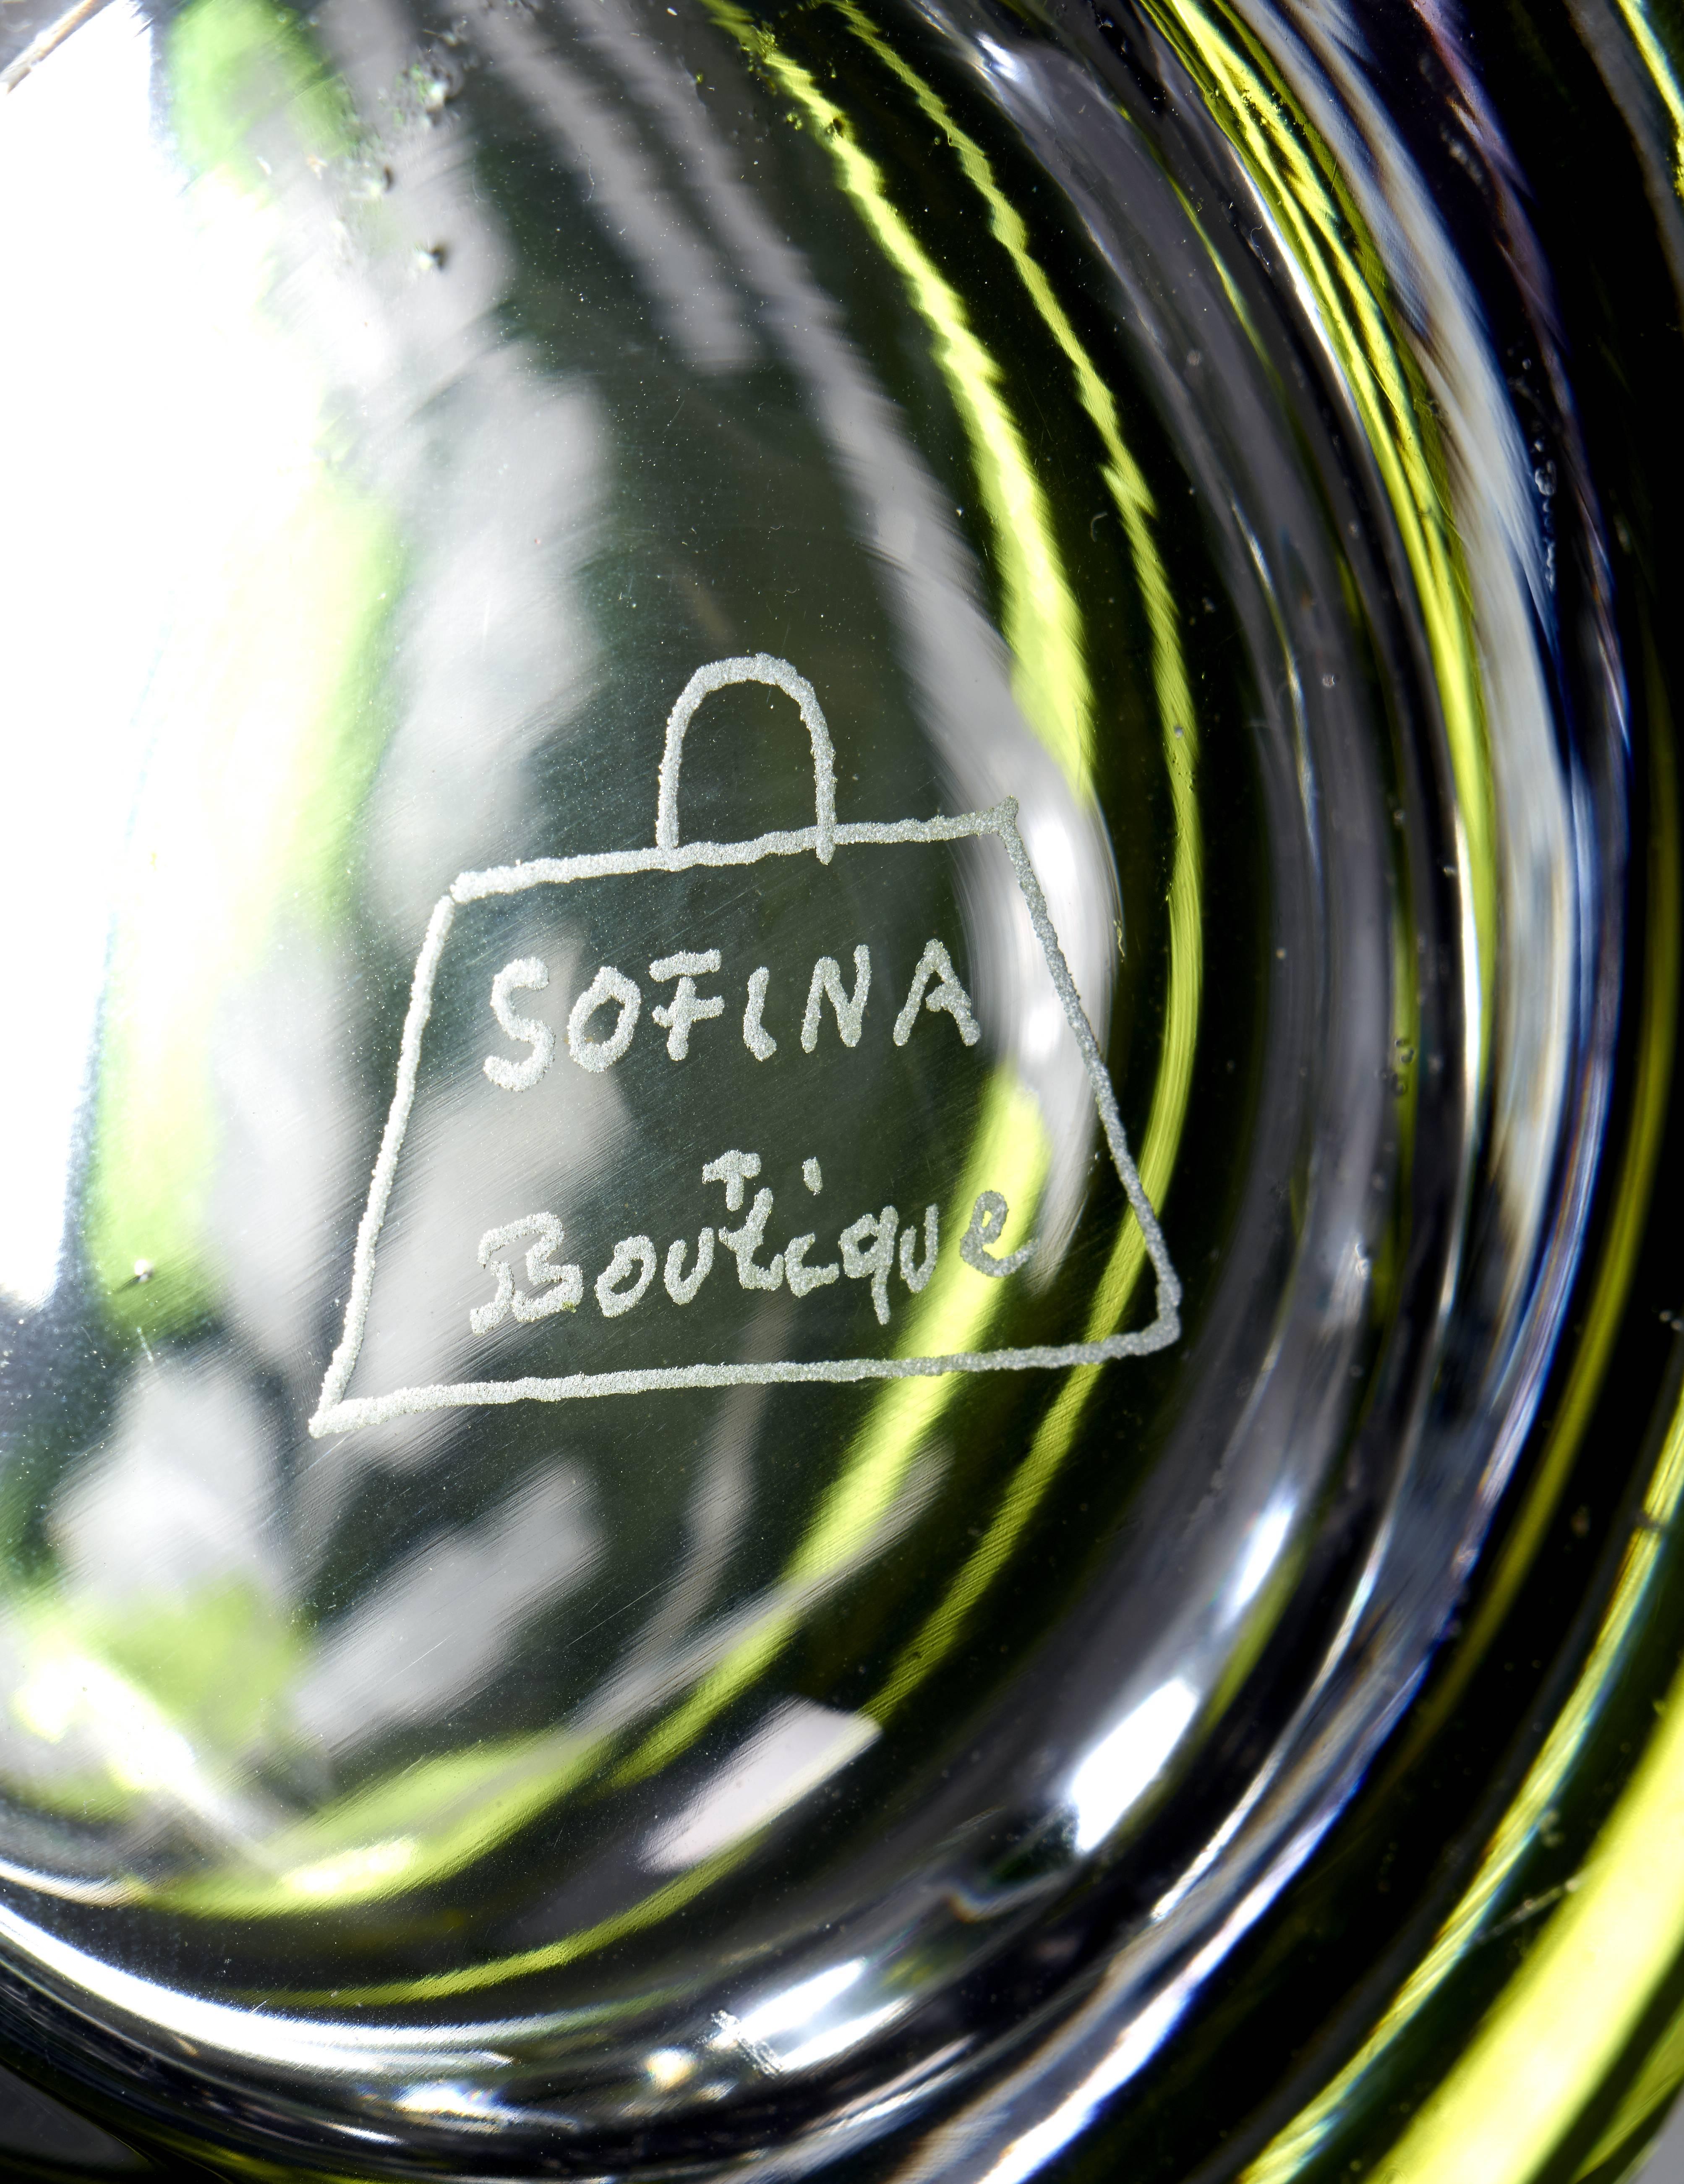 Handblown drinking glass made in Bavaria/Germany by Sofina Crystal. Hand-edged in a classic modern design with stars in turquoise blue. Comes in 6 different colors. A carafe can be ordered. Colors available green pink turqouise yellow amethyst and